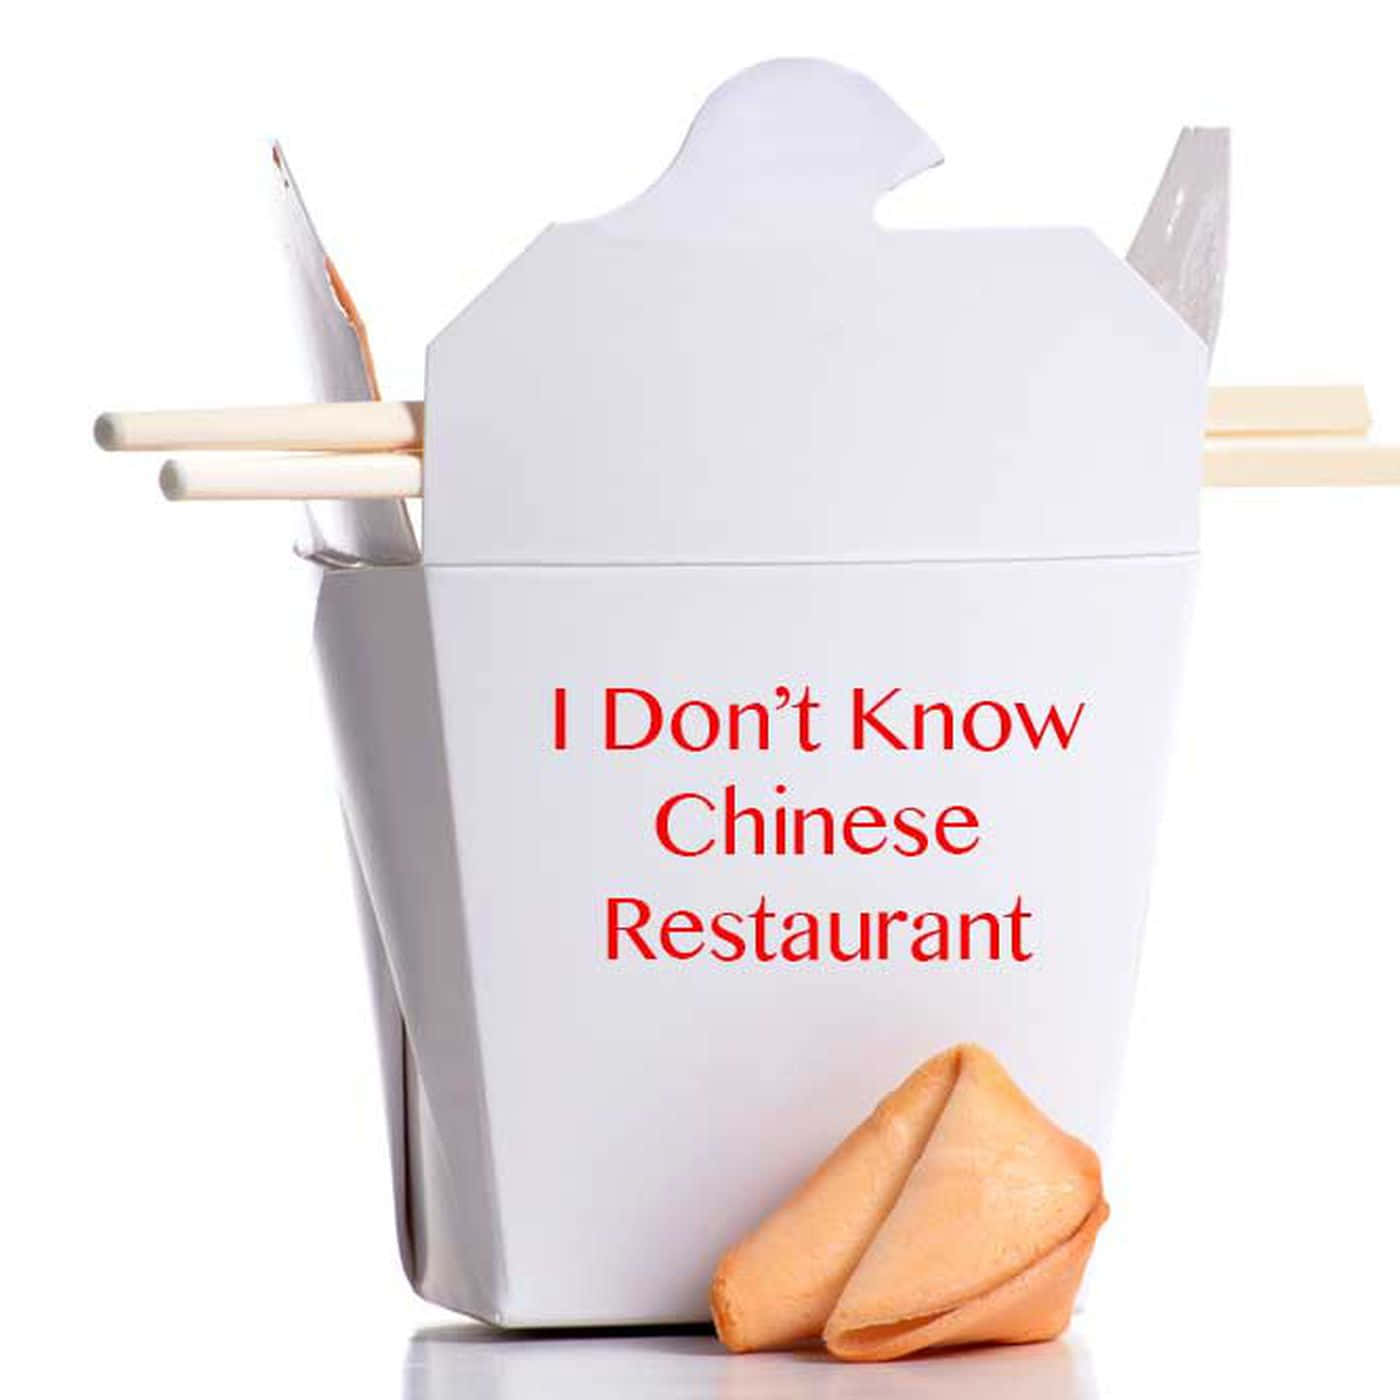 Enjoy a Delicious Meal of Chinese Food